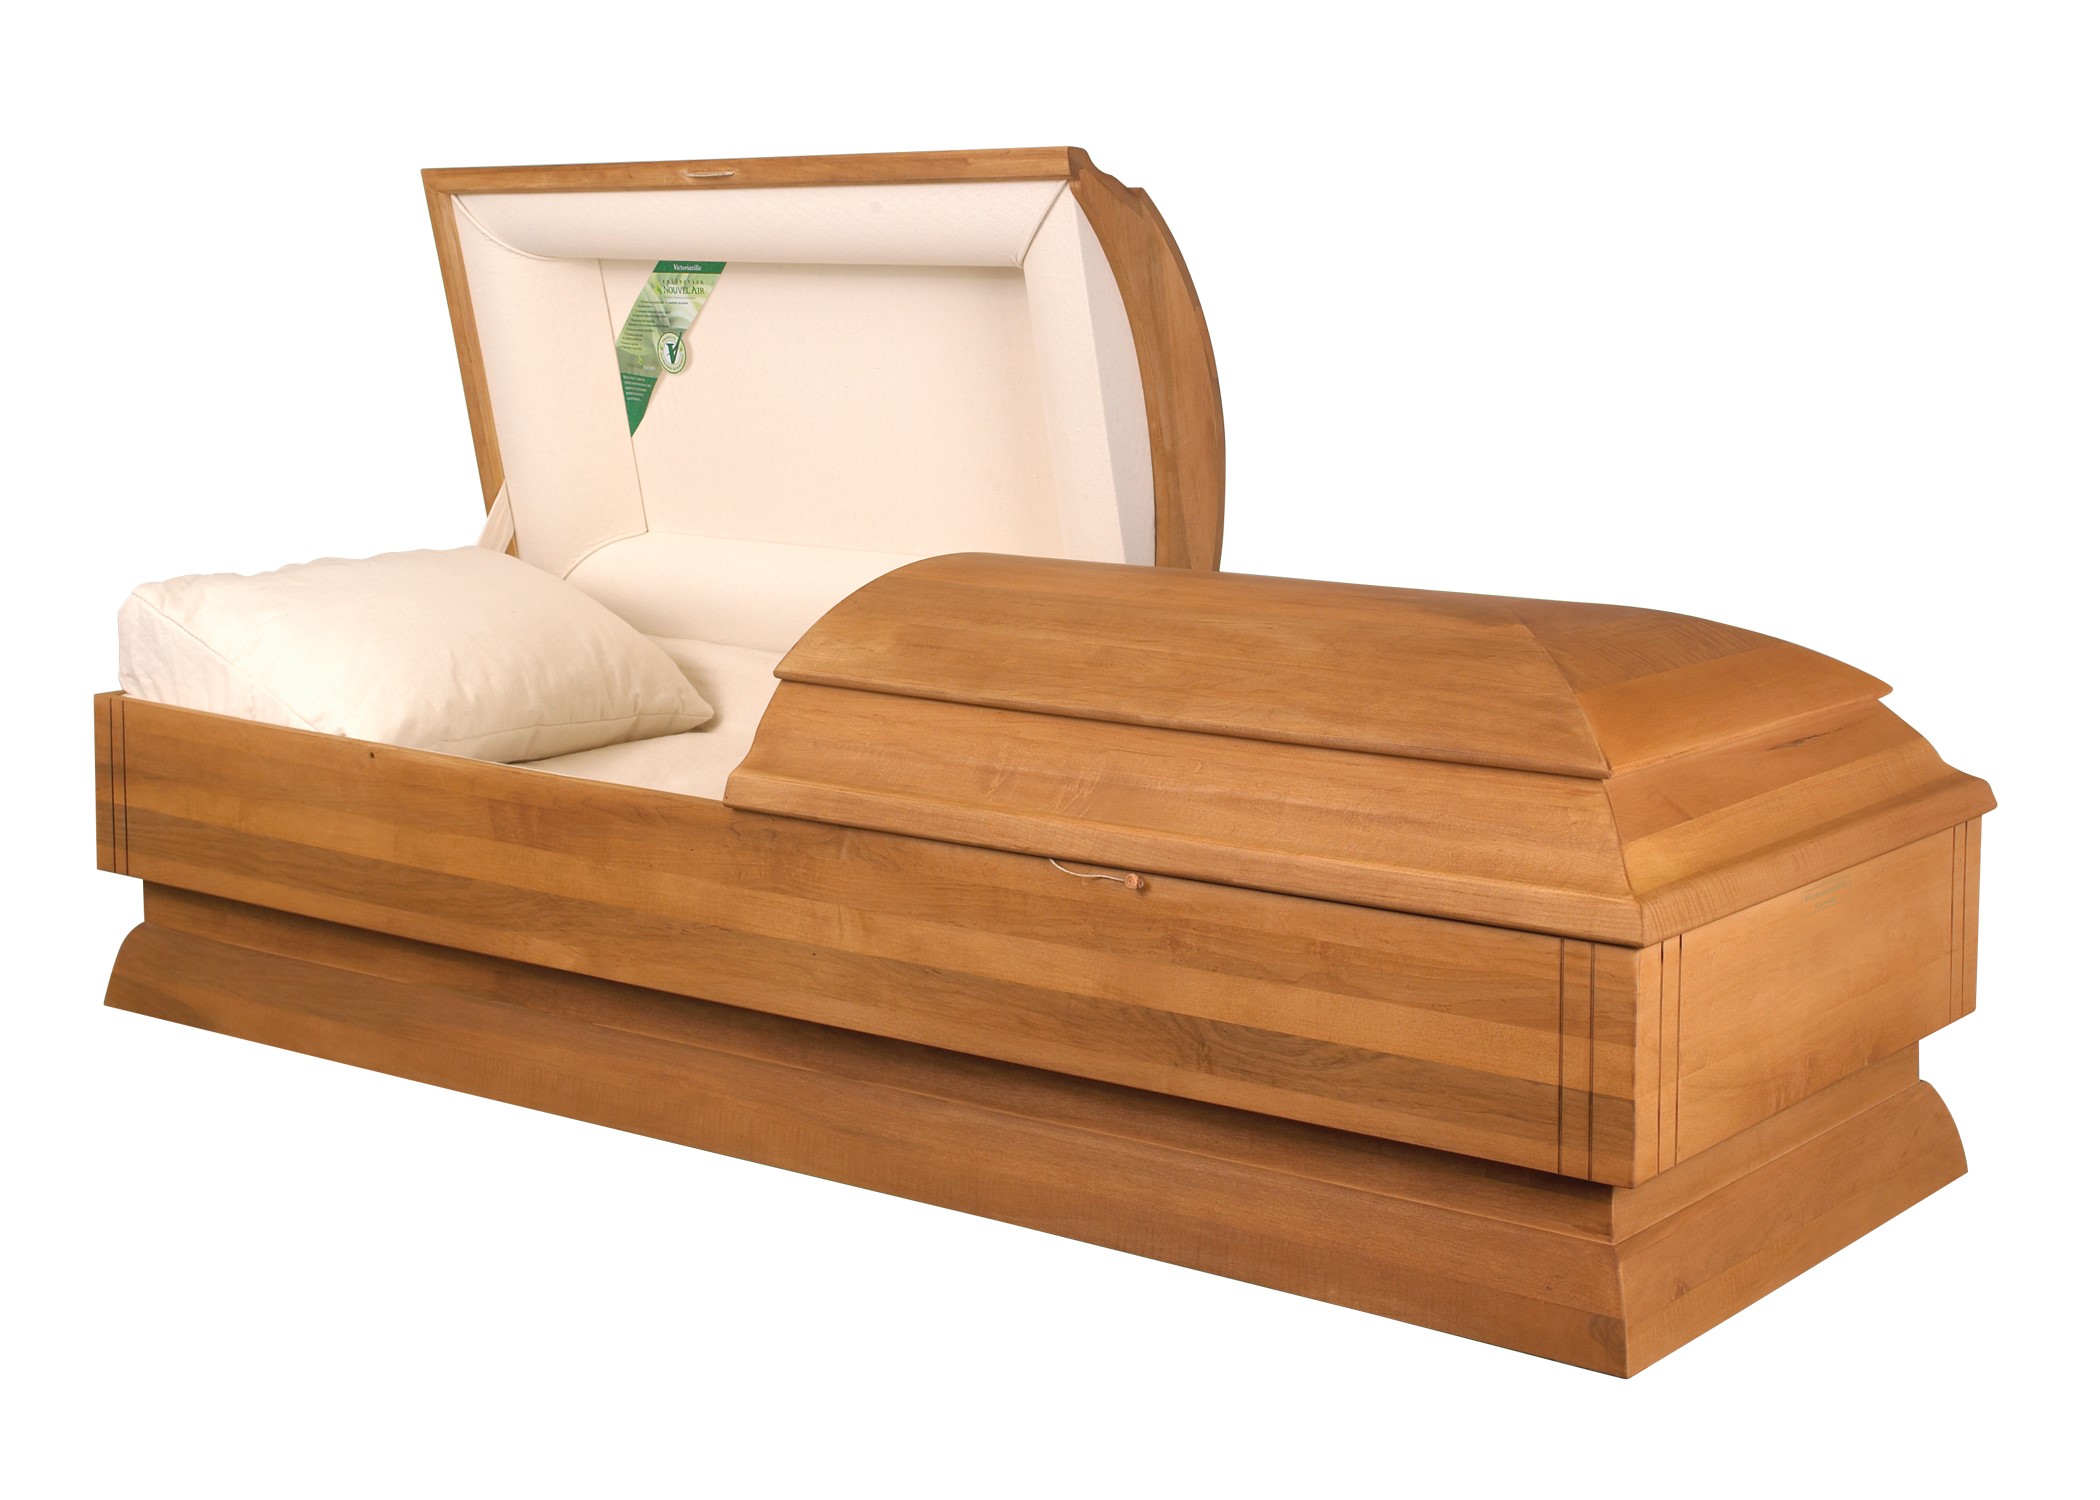 PRIMA
Silver Maple wood casket
Natural oil finish
Natural cotton interior with excelsior matress